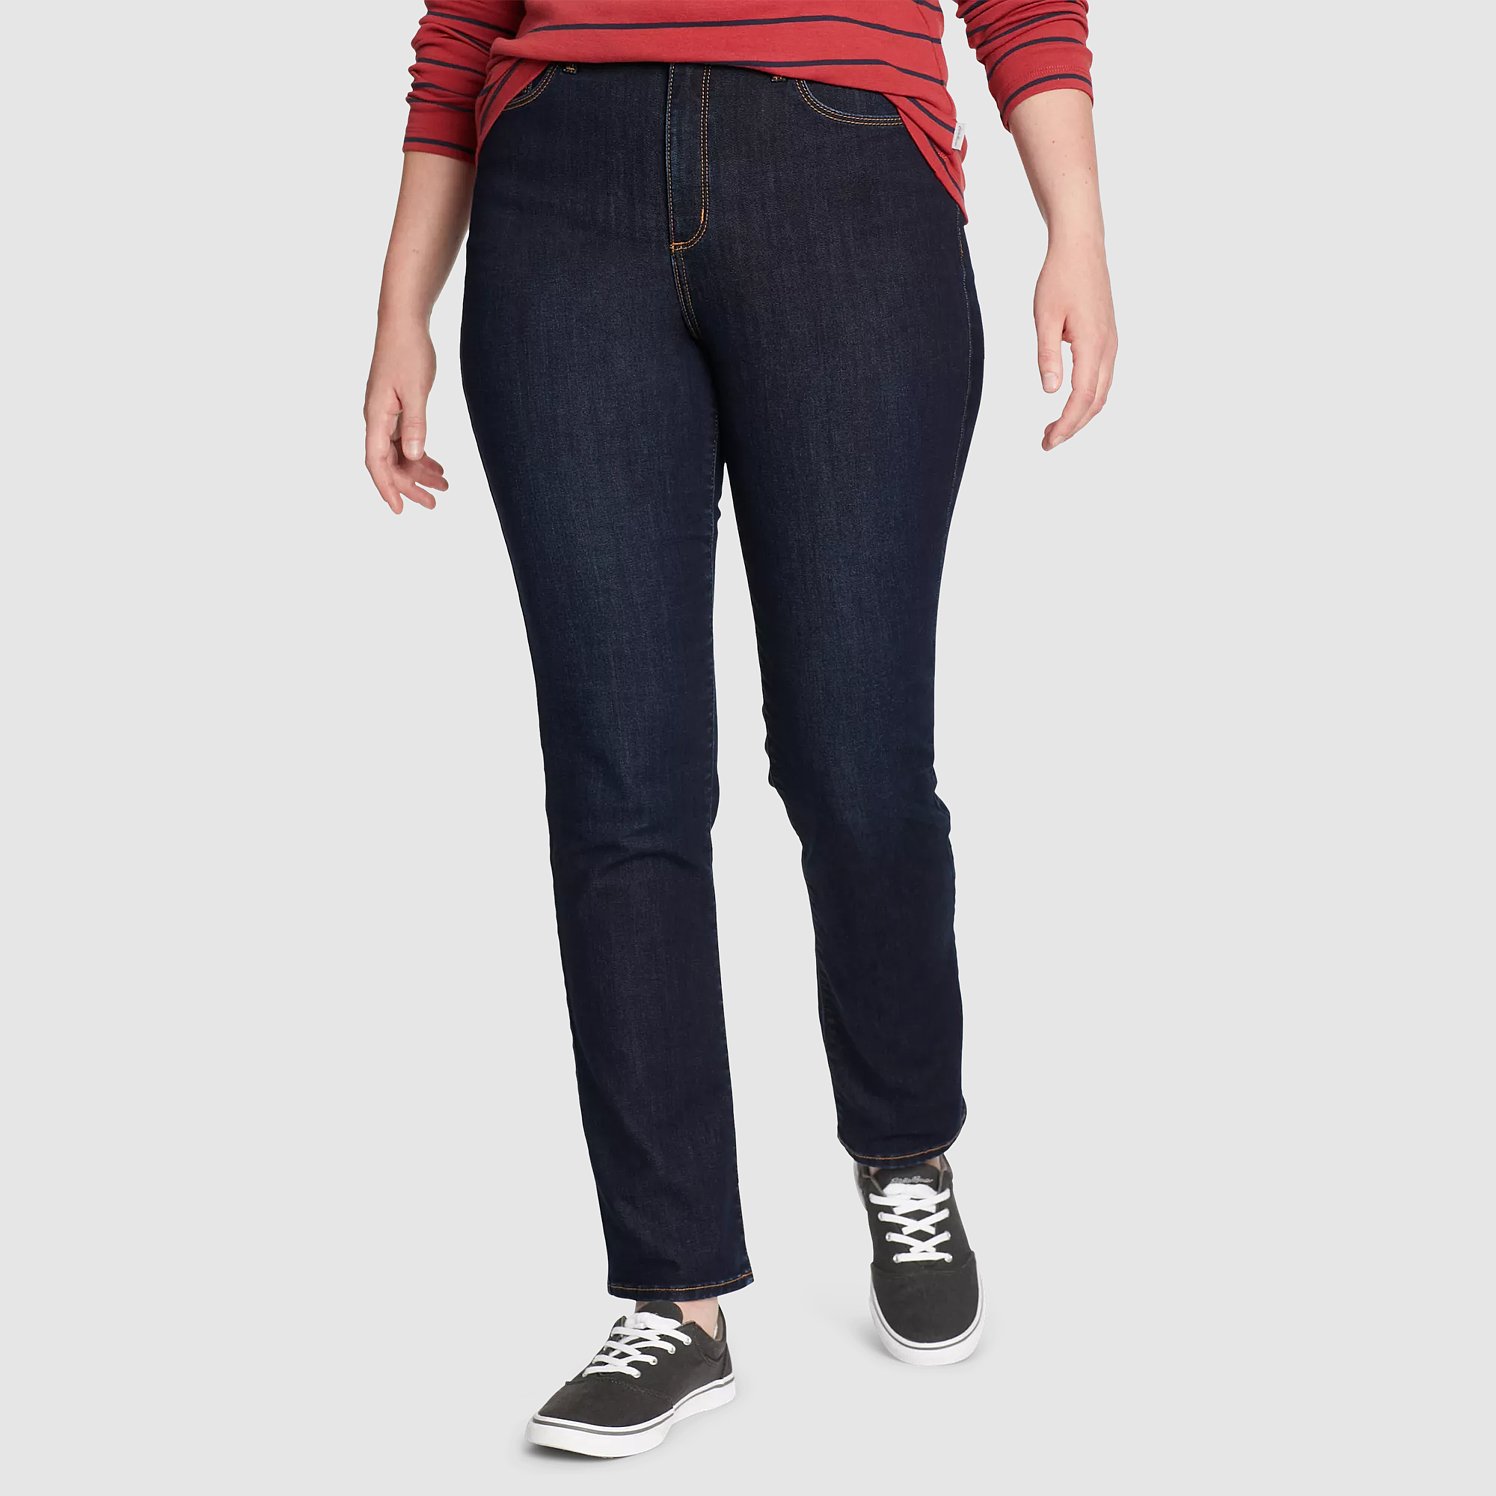 Women's Voyager High-rise Jeans - Slim Straight